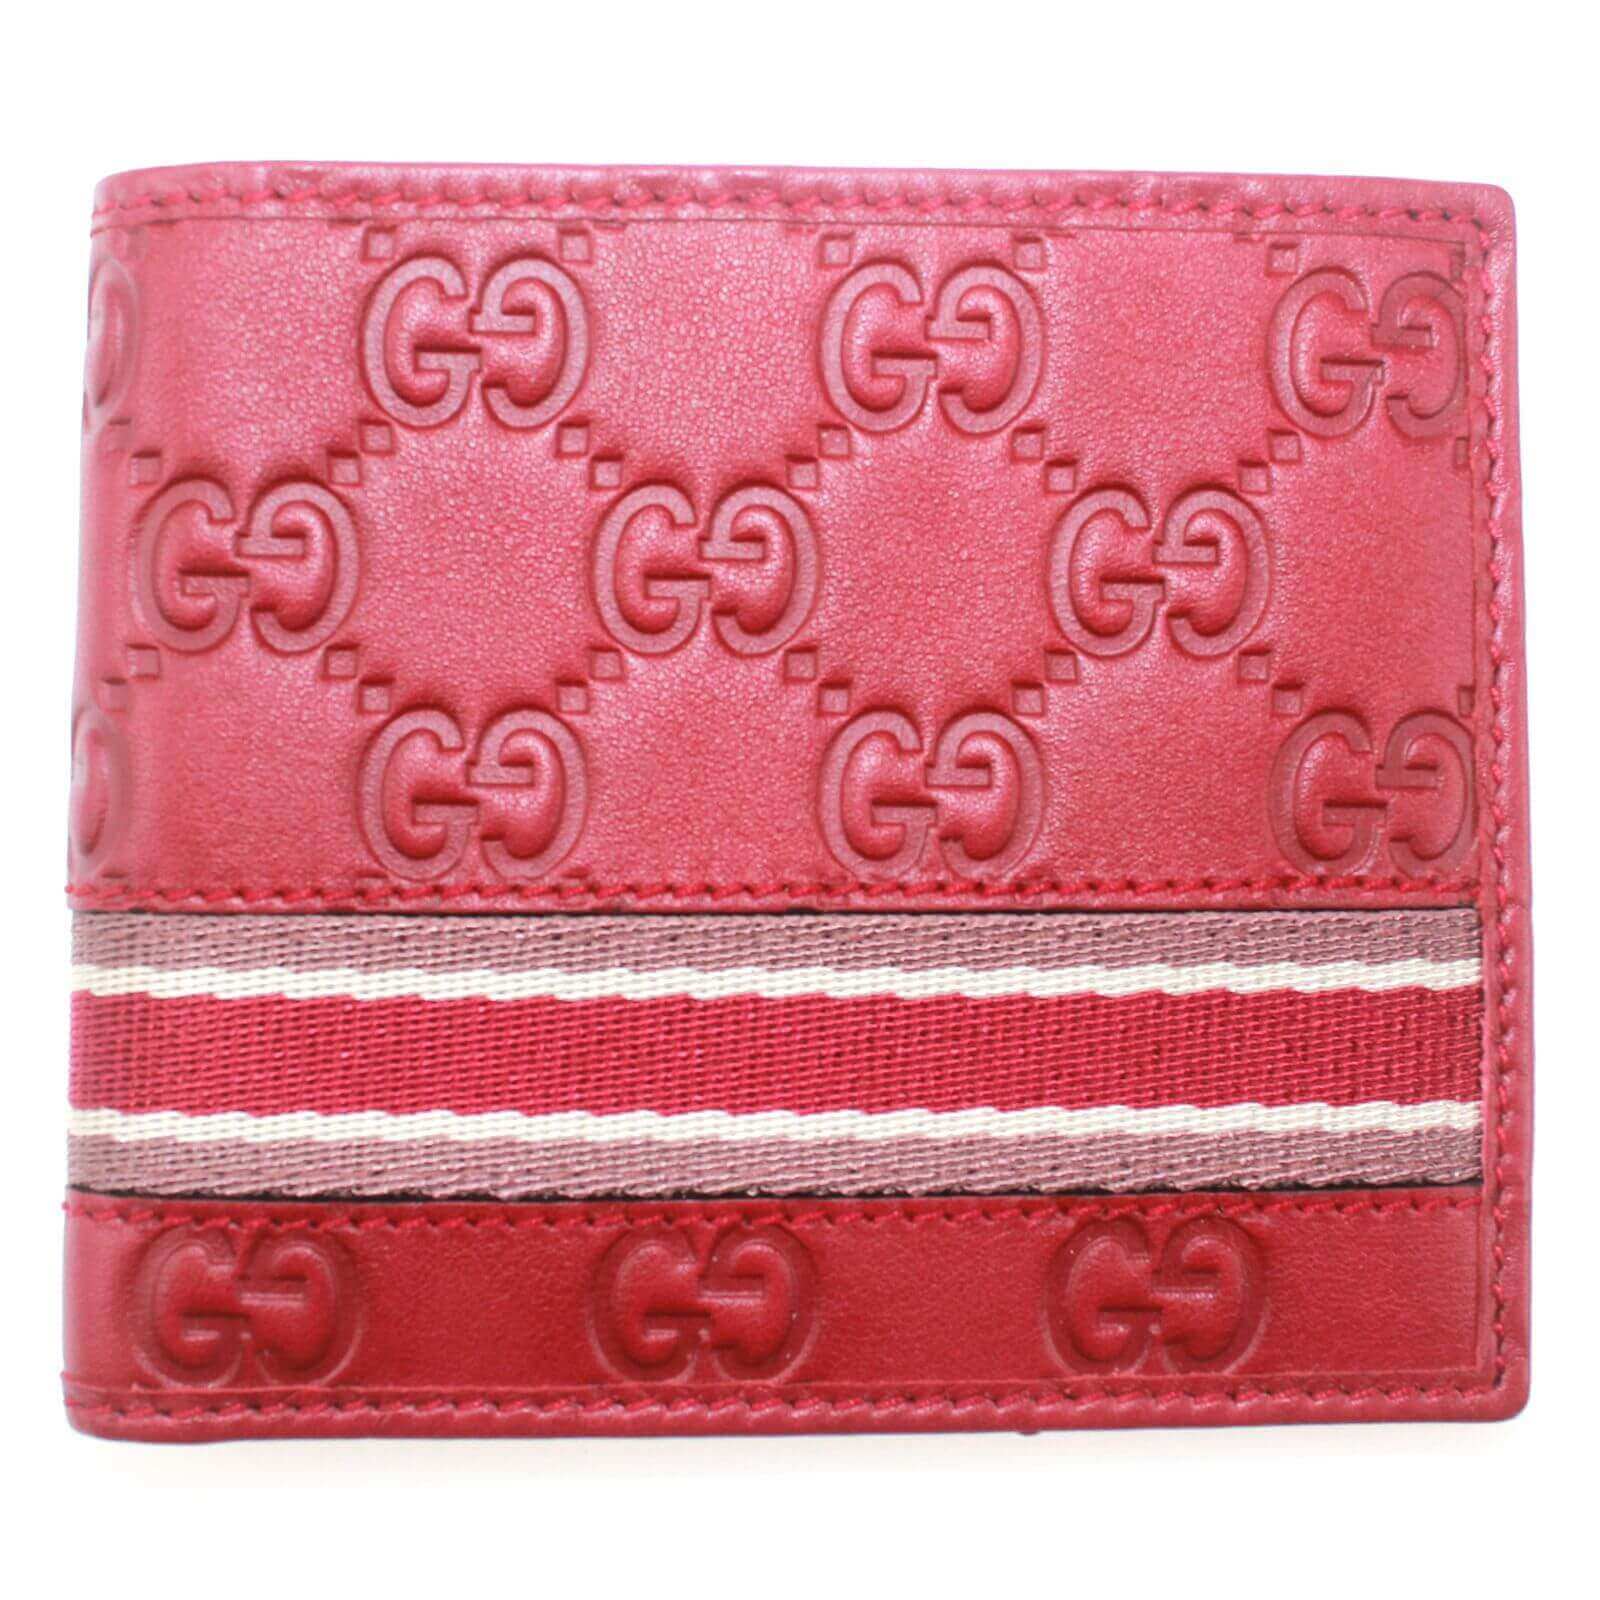 red mens gucci wallet